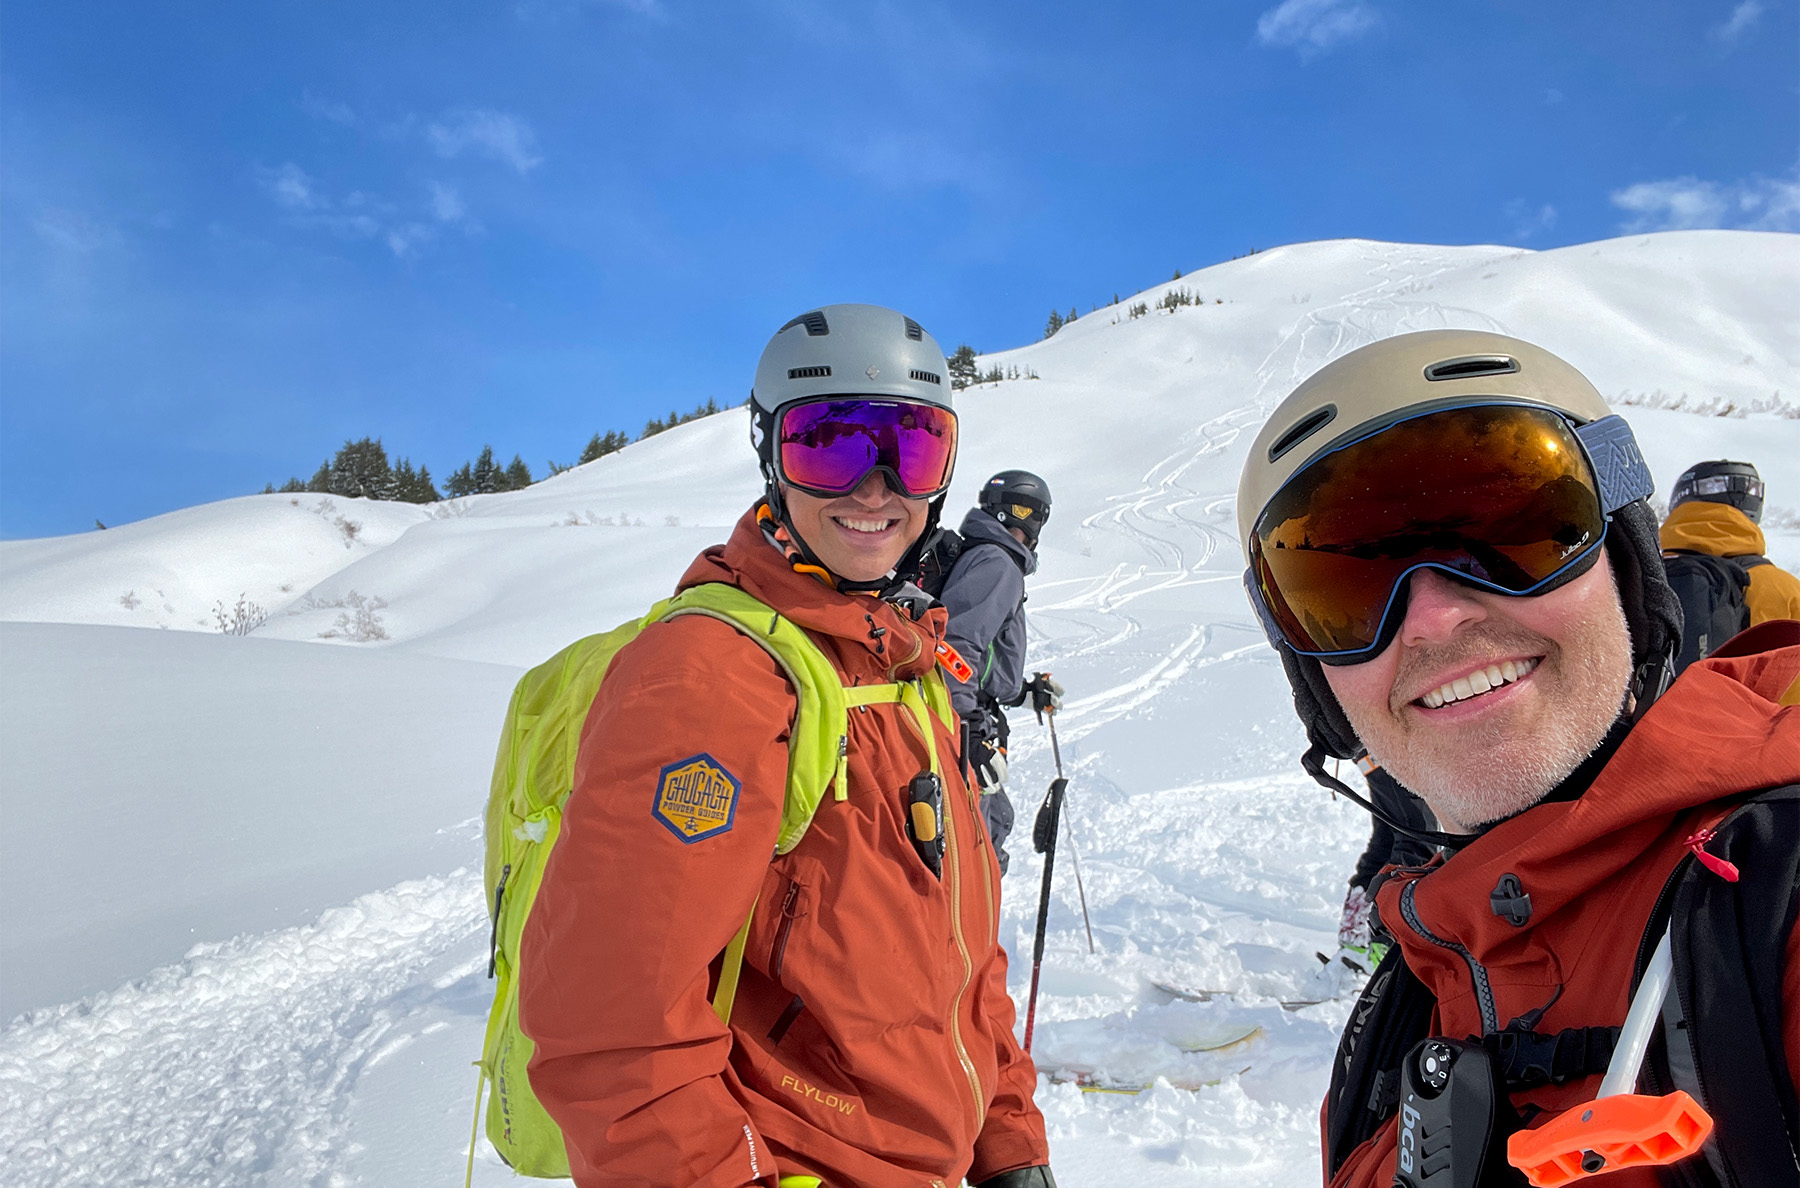 On Blister's GEAR:30 podcast, Jonathan Ellsworth & Paul Forward discuss some of the skis (from Folsom, DPS, Heritage Labs, & K2) they've been skiing at Chugach Powder Guides in Girdwood, Alaska